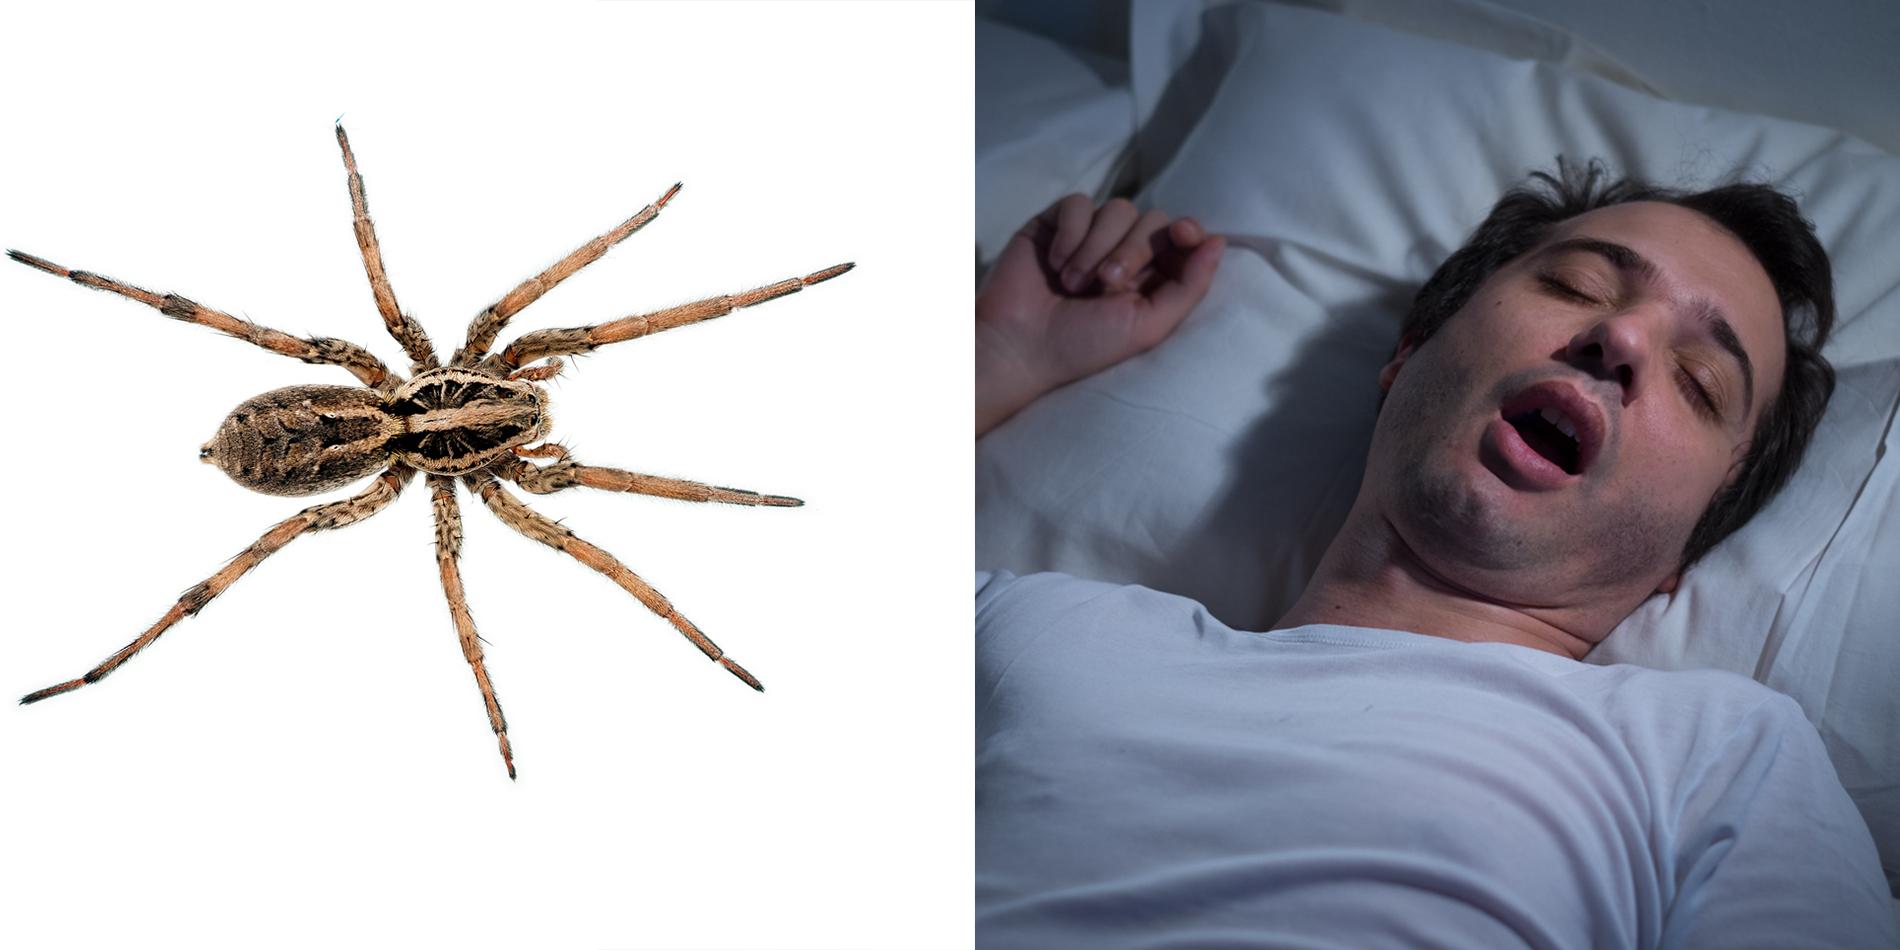 arachnophobia meme sleep in The eating your spiders truth sickening about